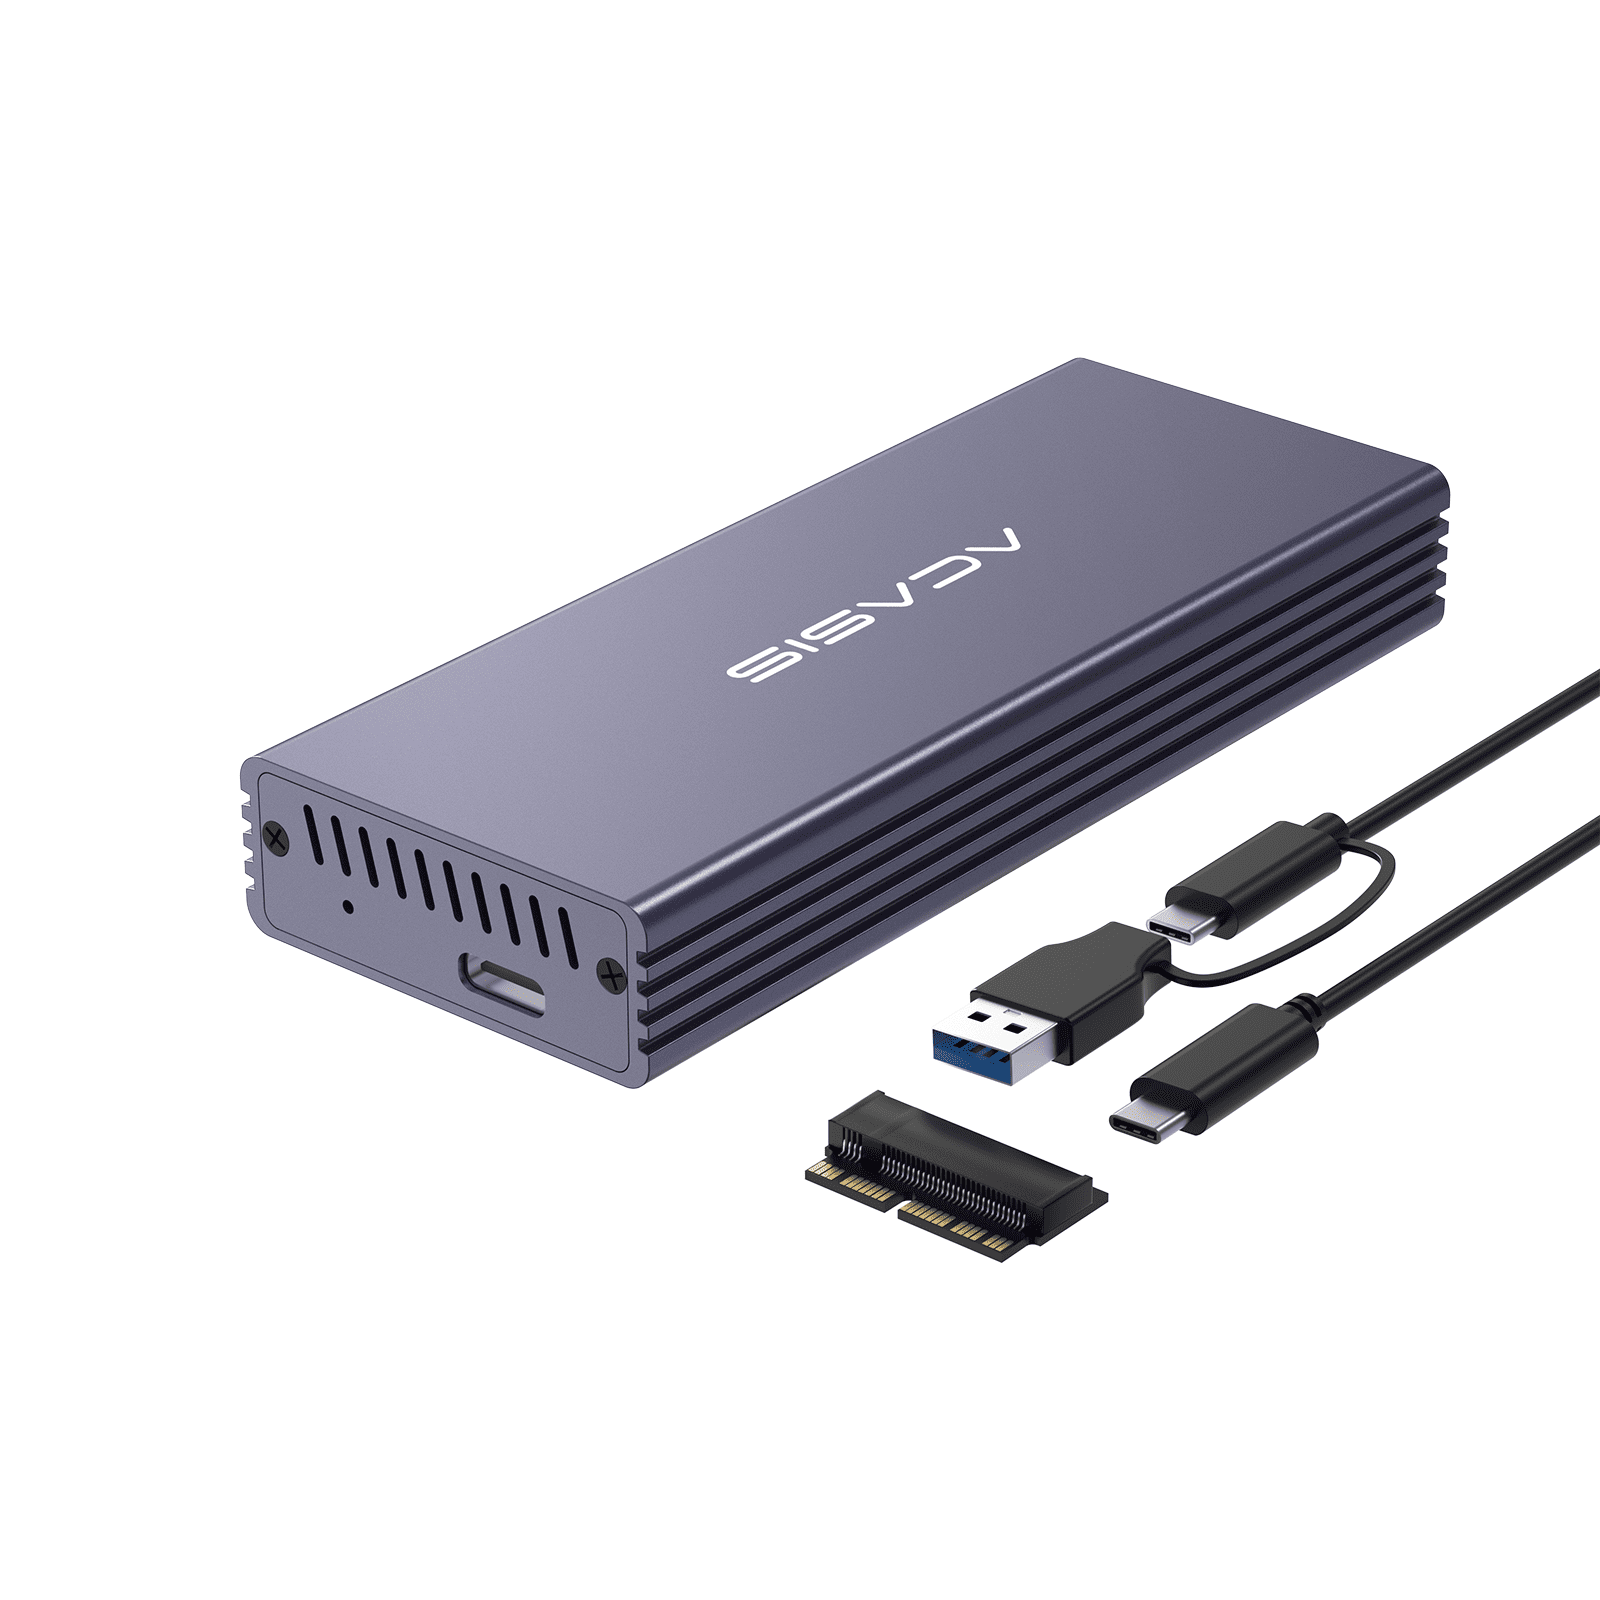 ACASIS 10Gbps High-Speed NVMe/SATA SSD Enclosure for M.2 SSD Compatible  with Thunderbolt 4/3 and Multiple OS including Windows and MAC, M04B 